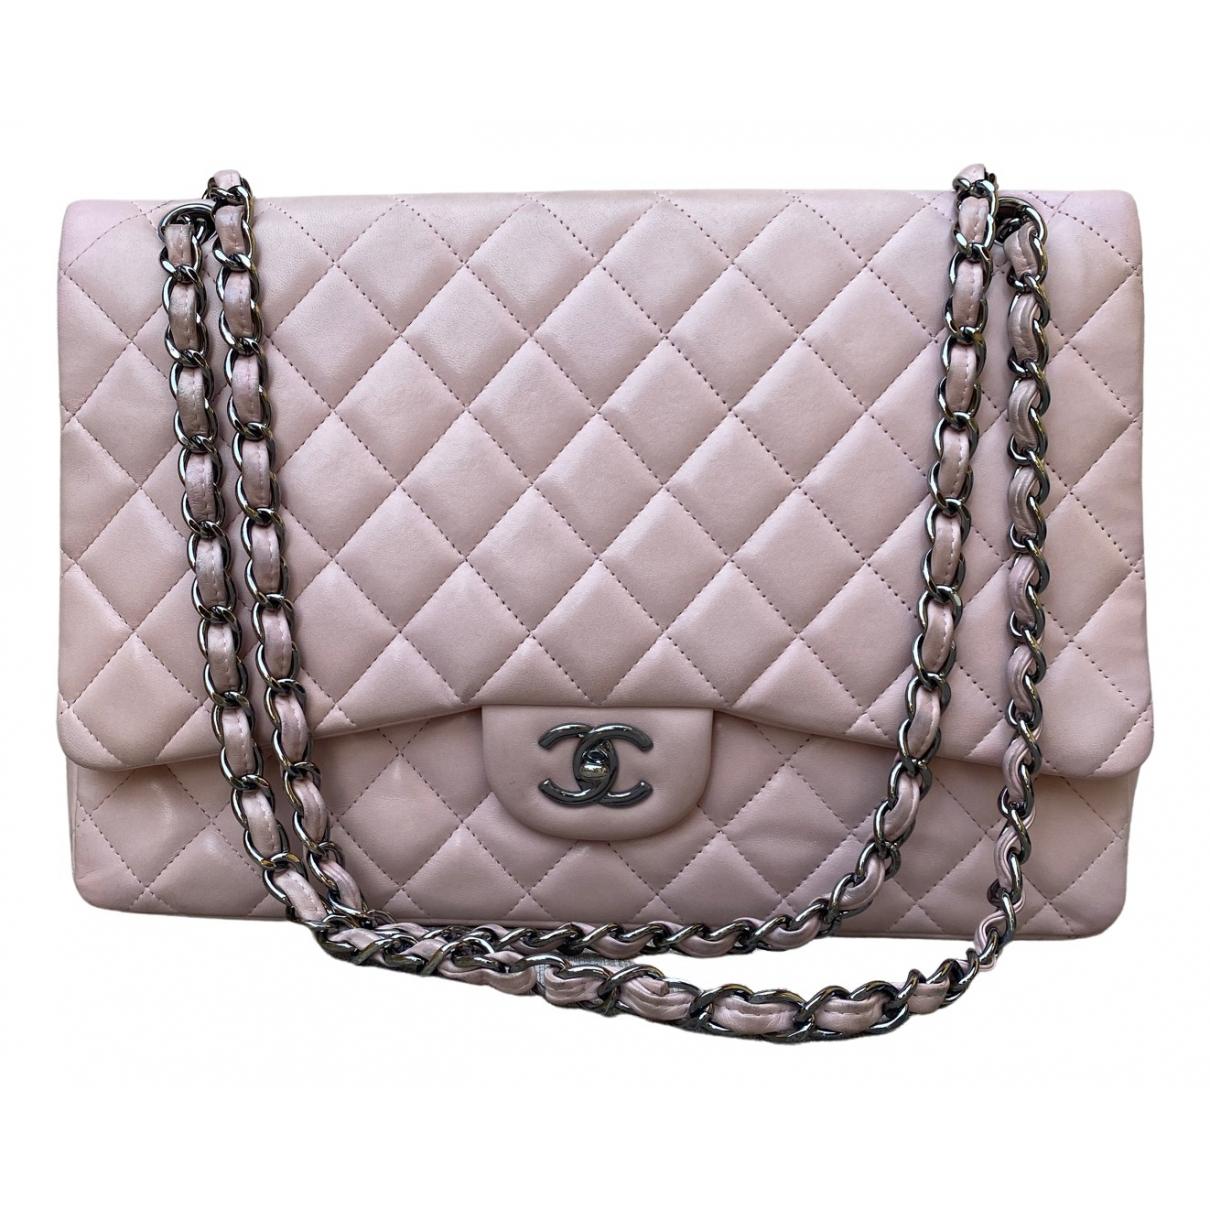 Timeless/classique leather crossbody bag Chanel Pink in Leather - 33918929